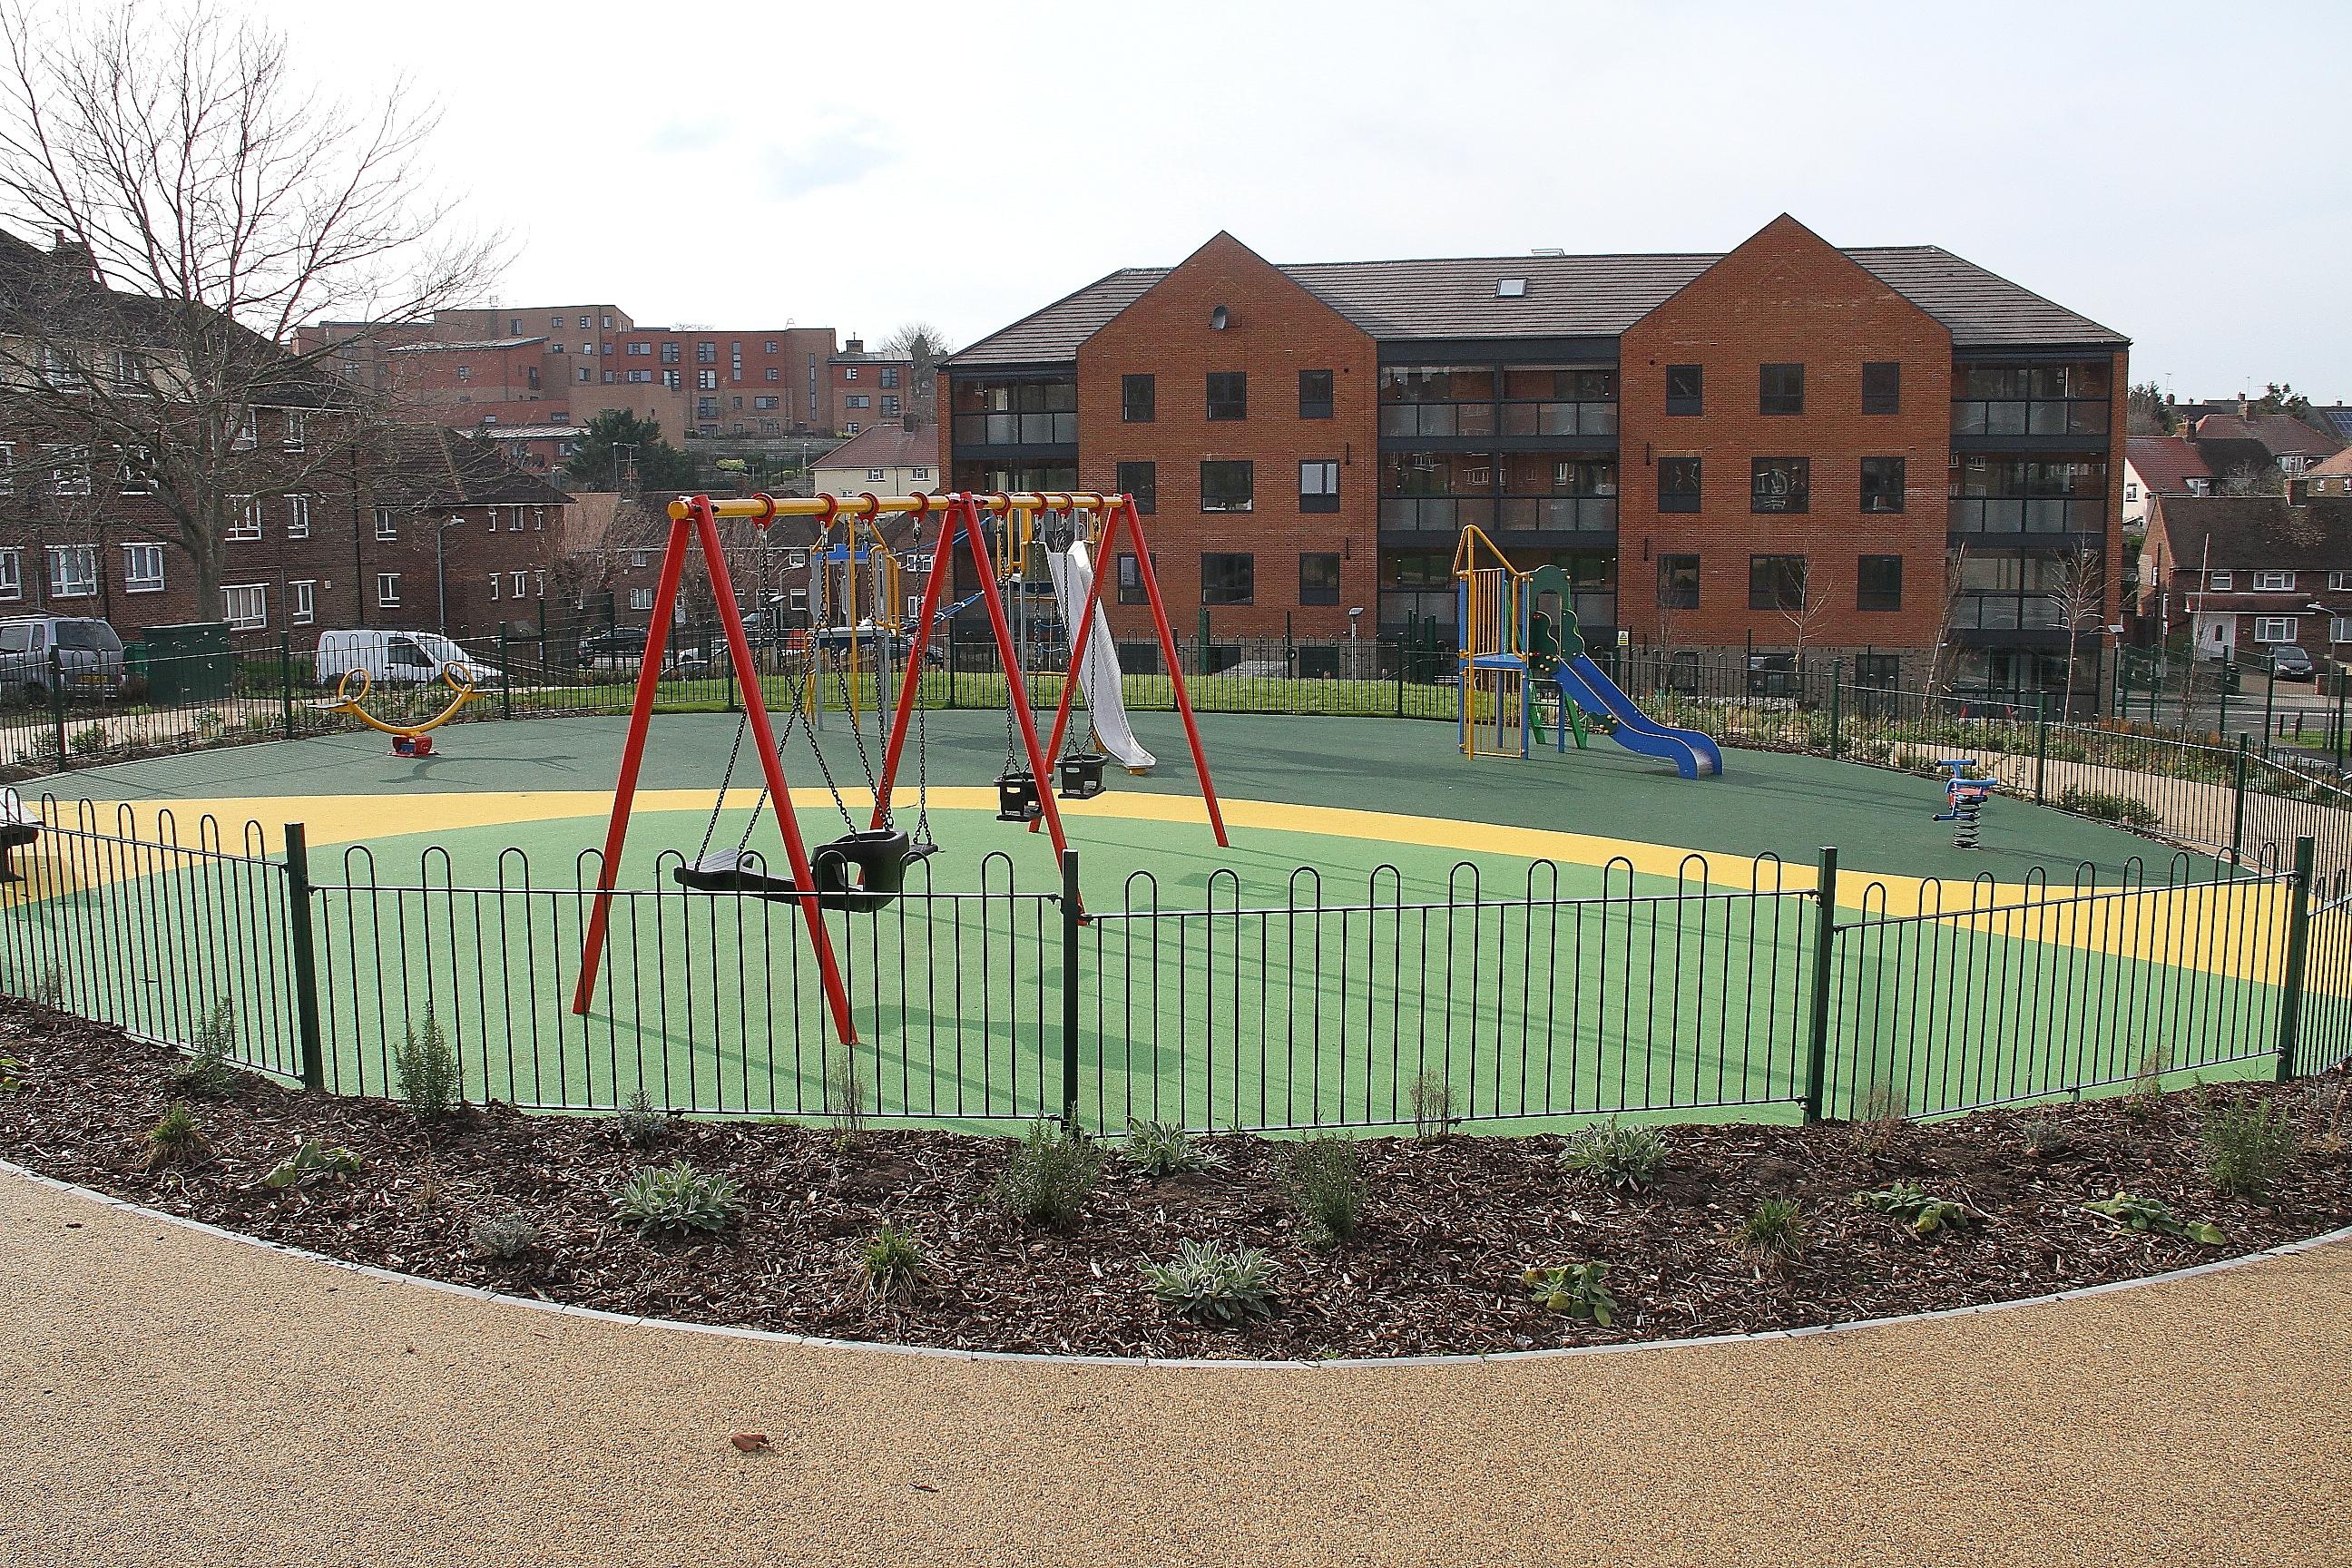 Children's swings and slide within a fenced off play area in front of a council housing block.